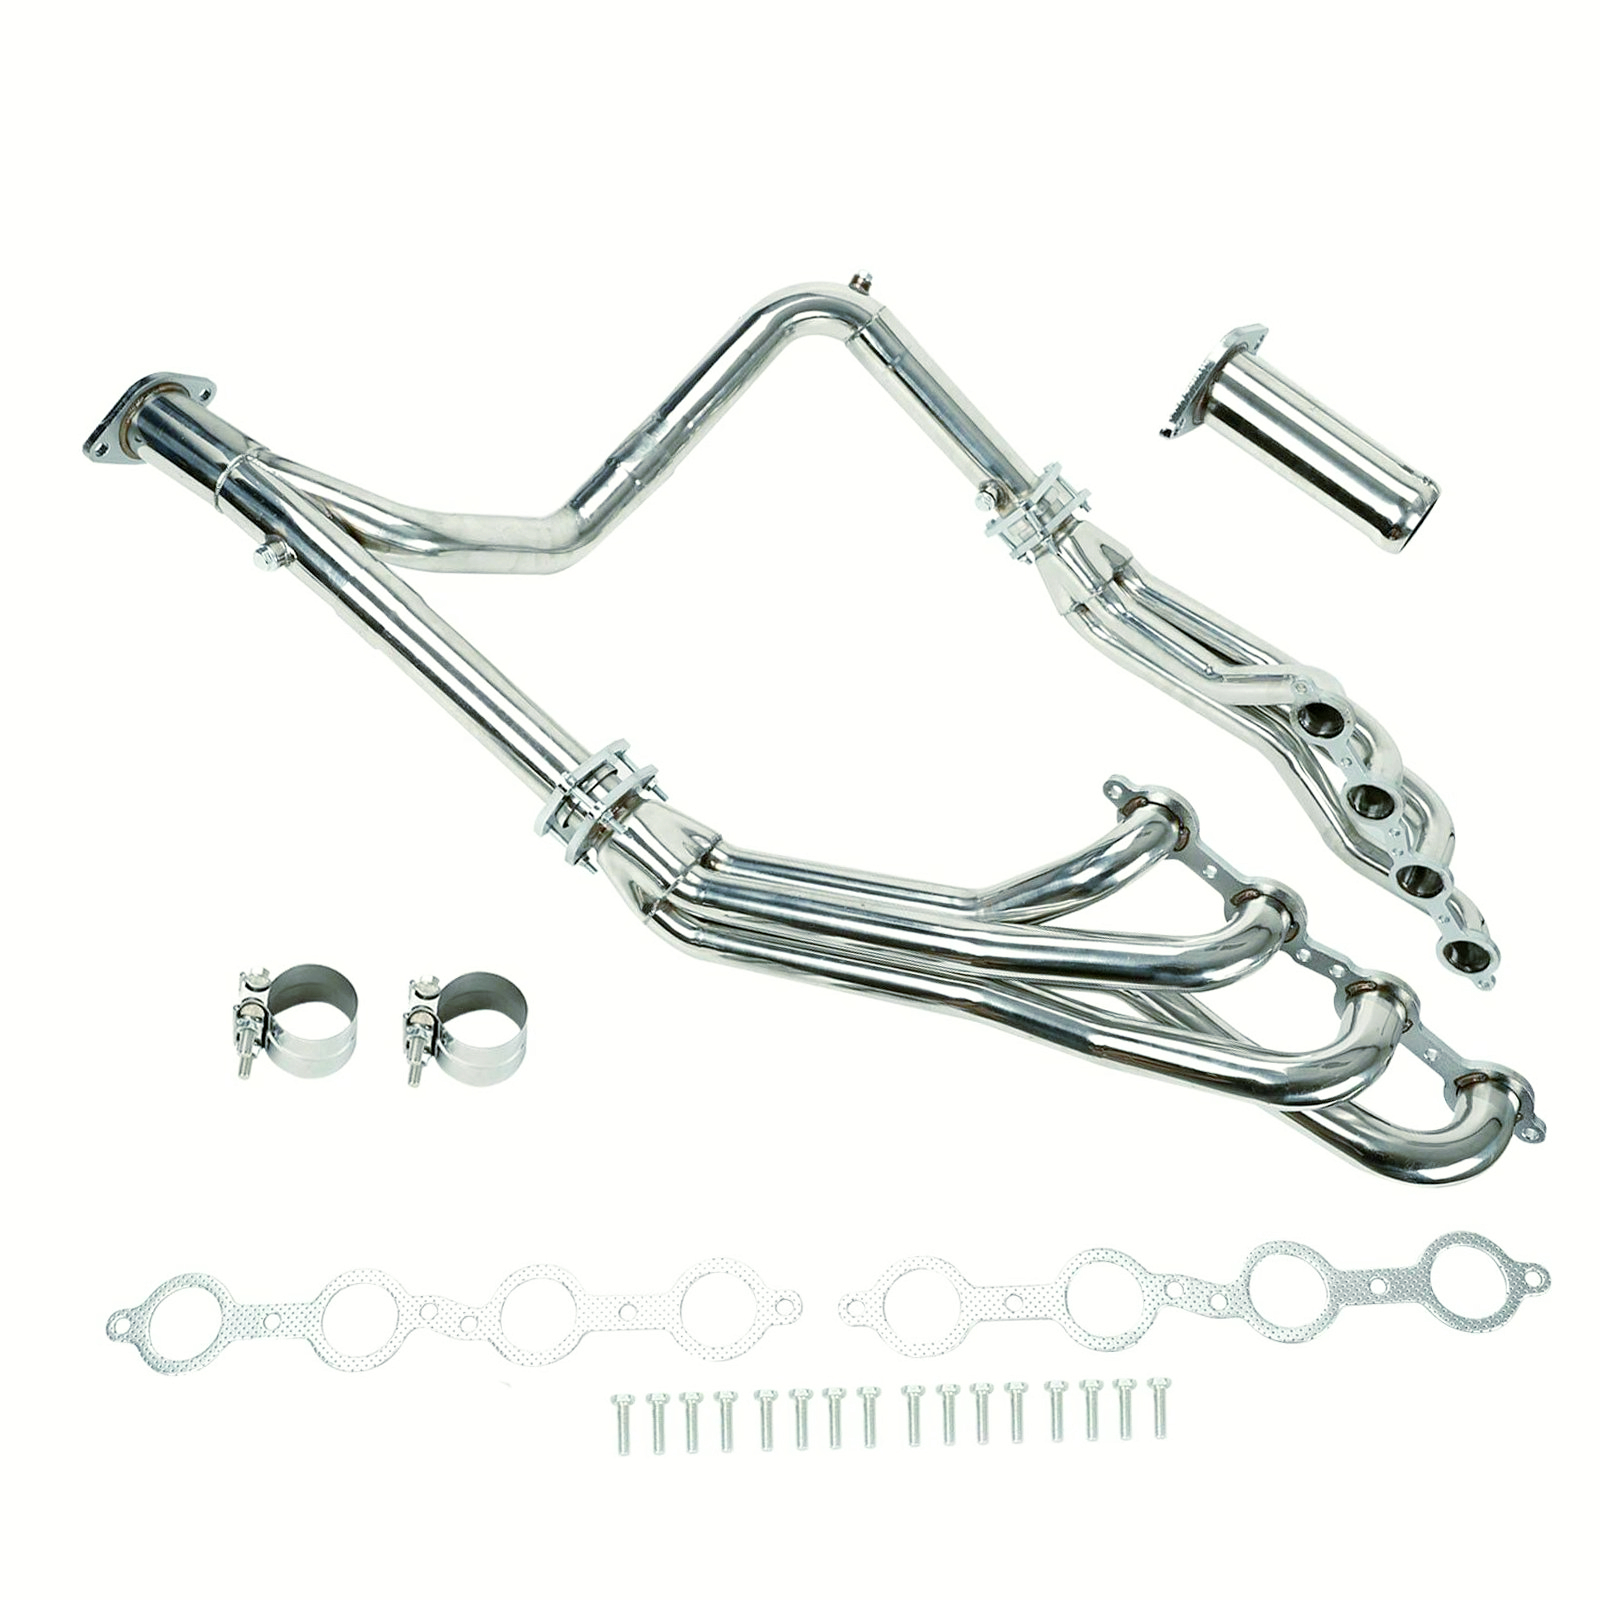 Long Tube Stainless Steel Headers W/ Y Pipe For Chevy GMC 07-14 4.8L 5.3L 6.0L Exhaust Header